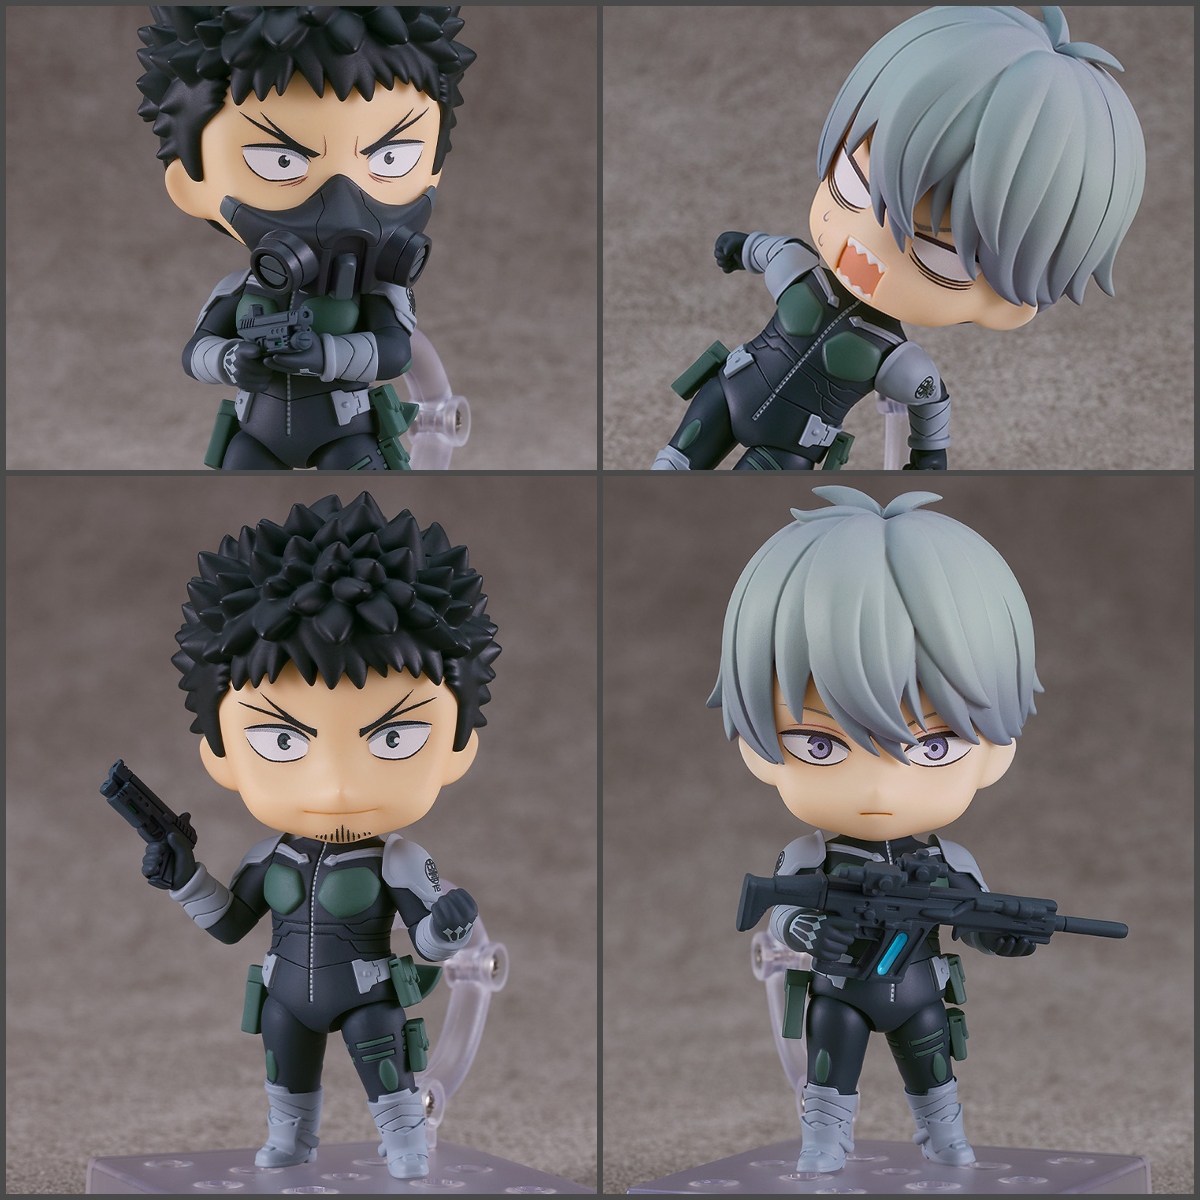 From the anime 'Kaiju No. 8' comes Nendoroids of Kafka Hibino and Leno Ichikawa. Preorder today and add these to your collection! Shop: s.goodsmile.link/hyI #KaijuNo8 #goodsmile